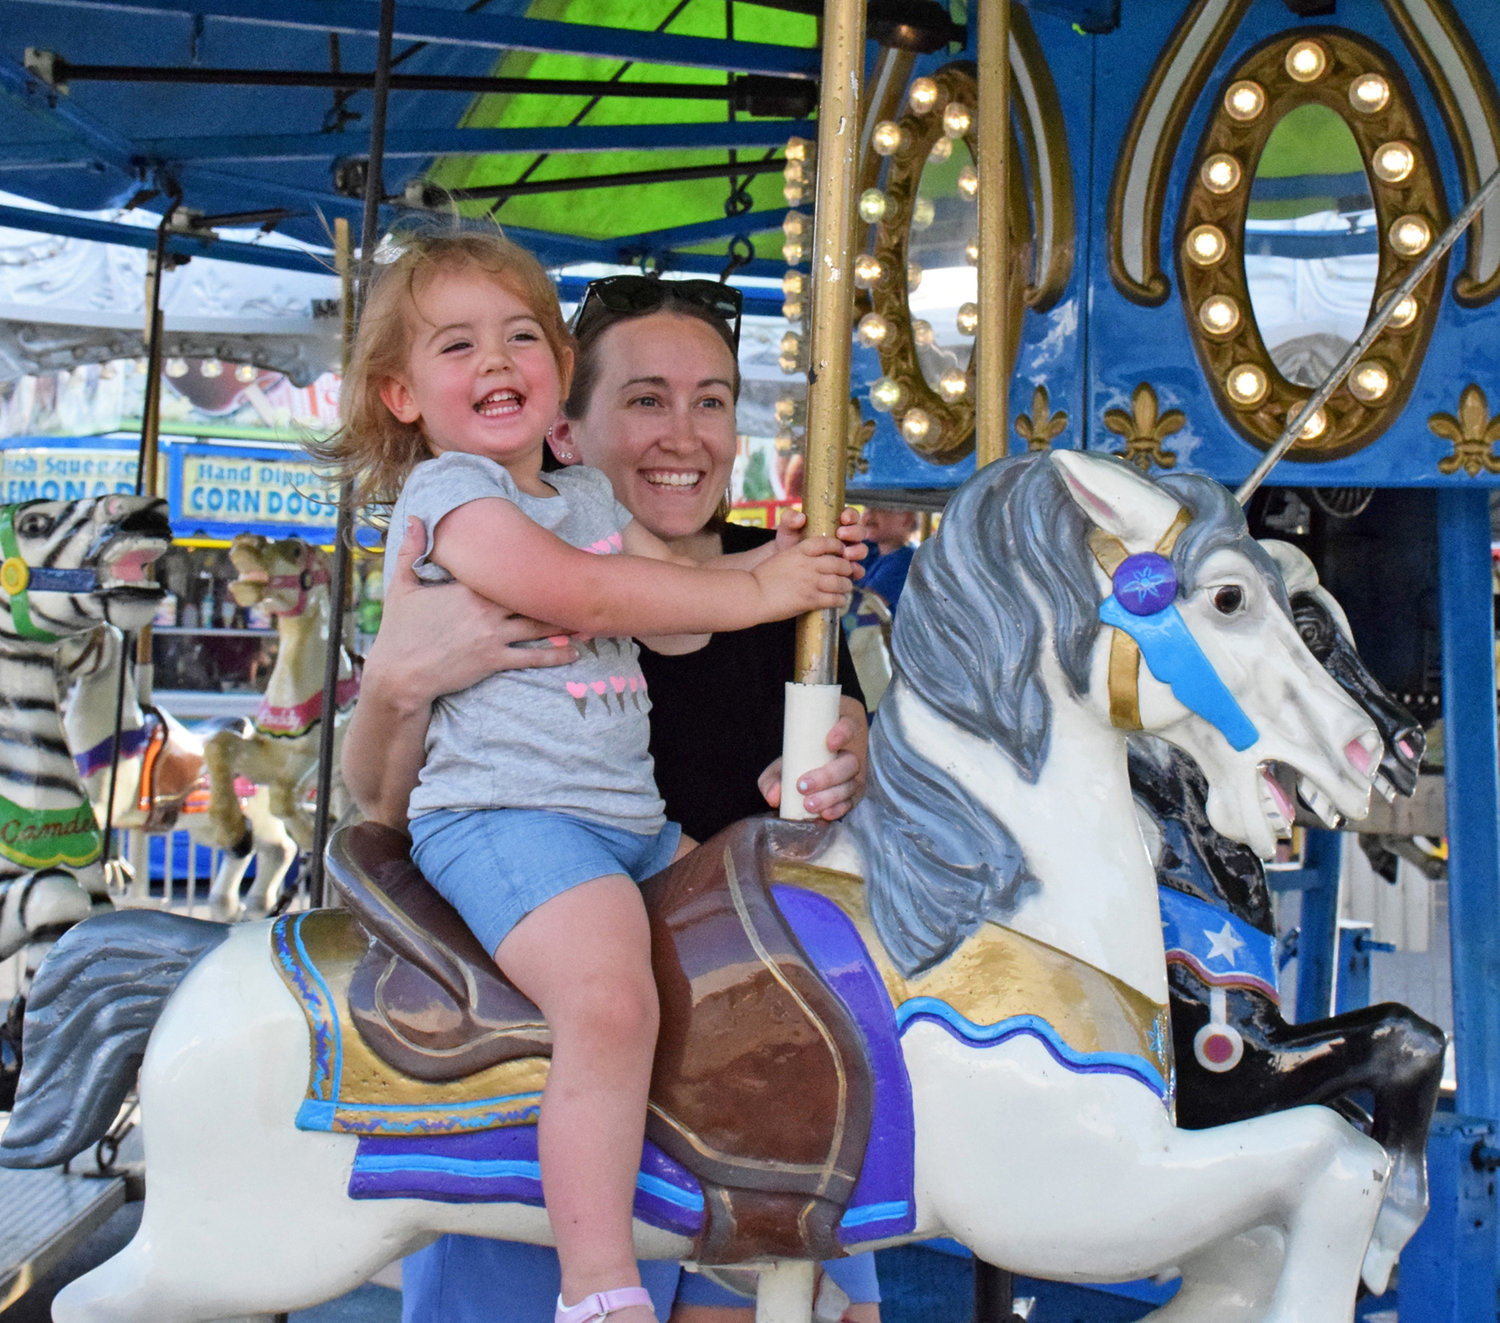 Kristy Wack and her daughter, Payton, 2, of Sellersville ride the carousel.